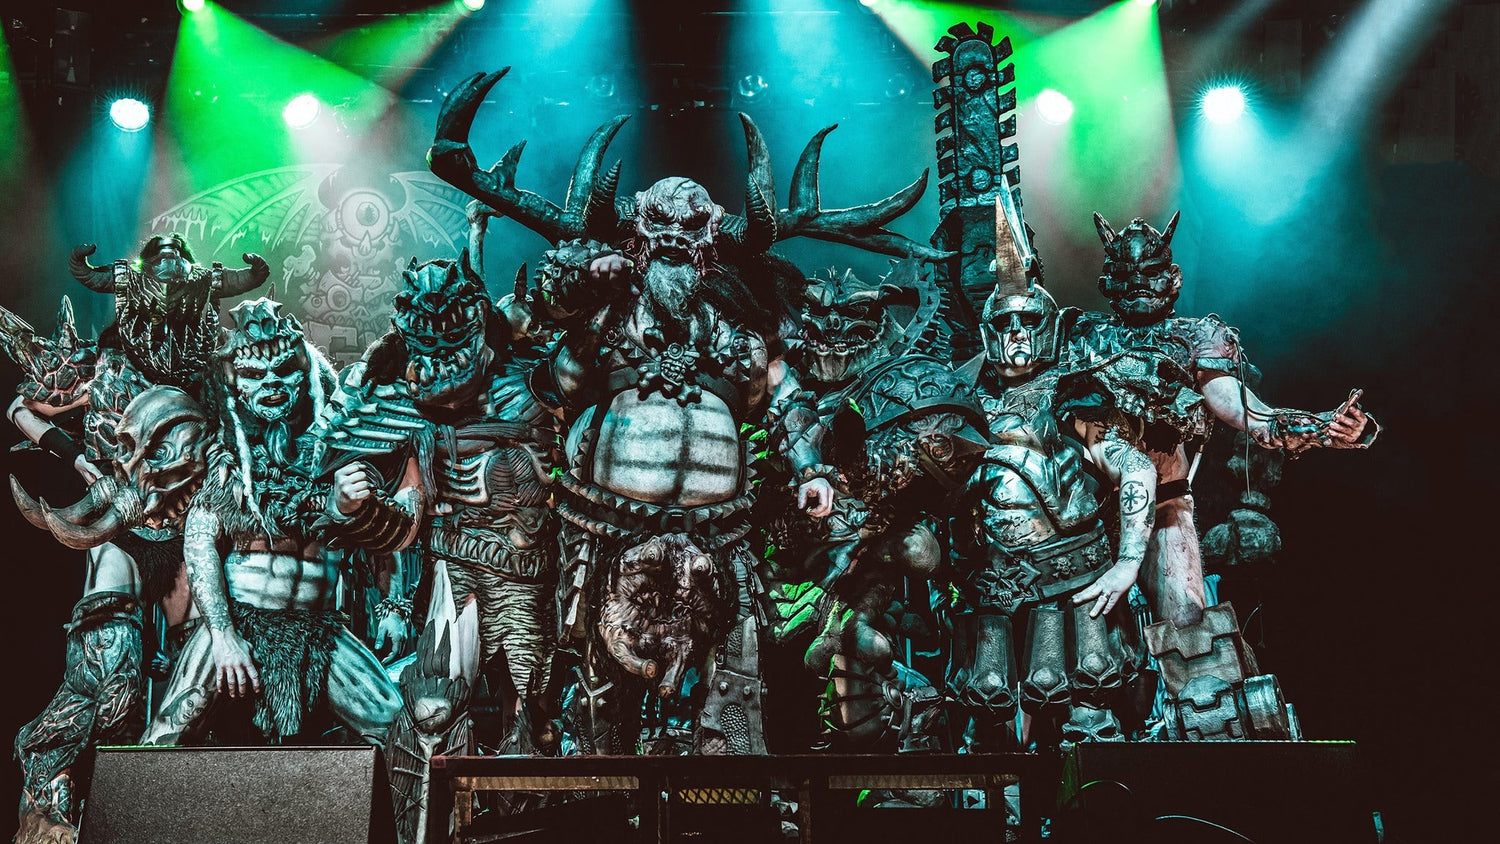 30 Years After Scumdogs of the Universe, GWAR’s Blothar Talks Cryptocurrency, Paris Hilton, and the Redneck Archetype